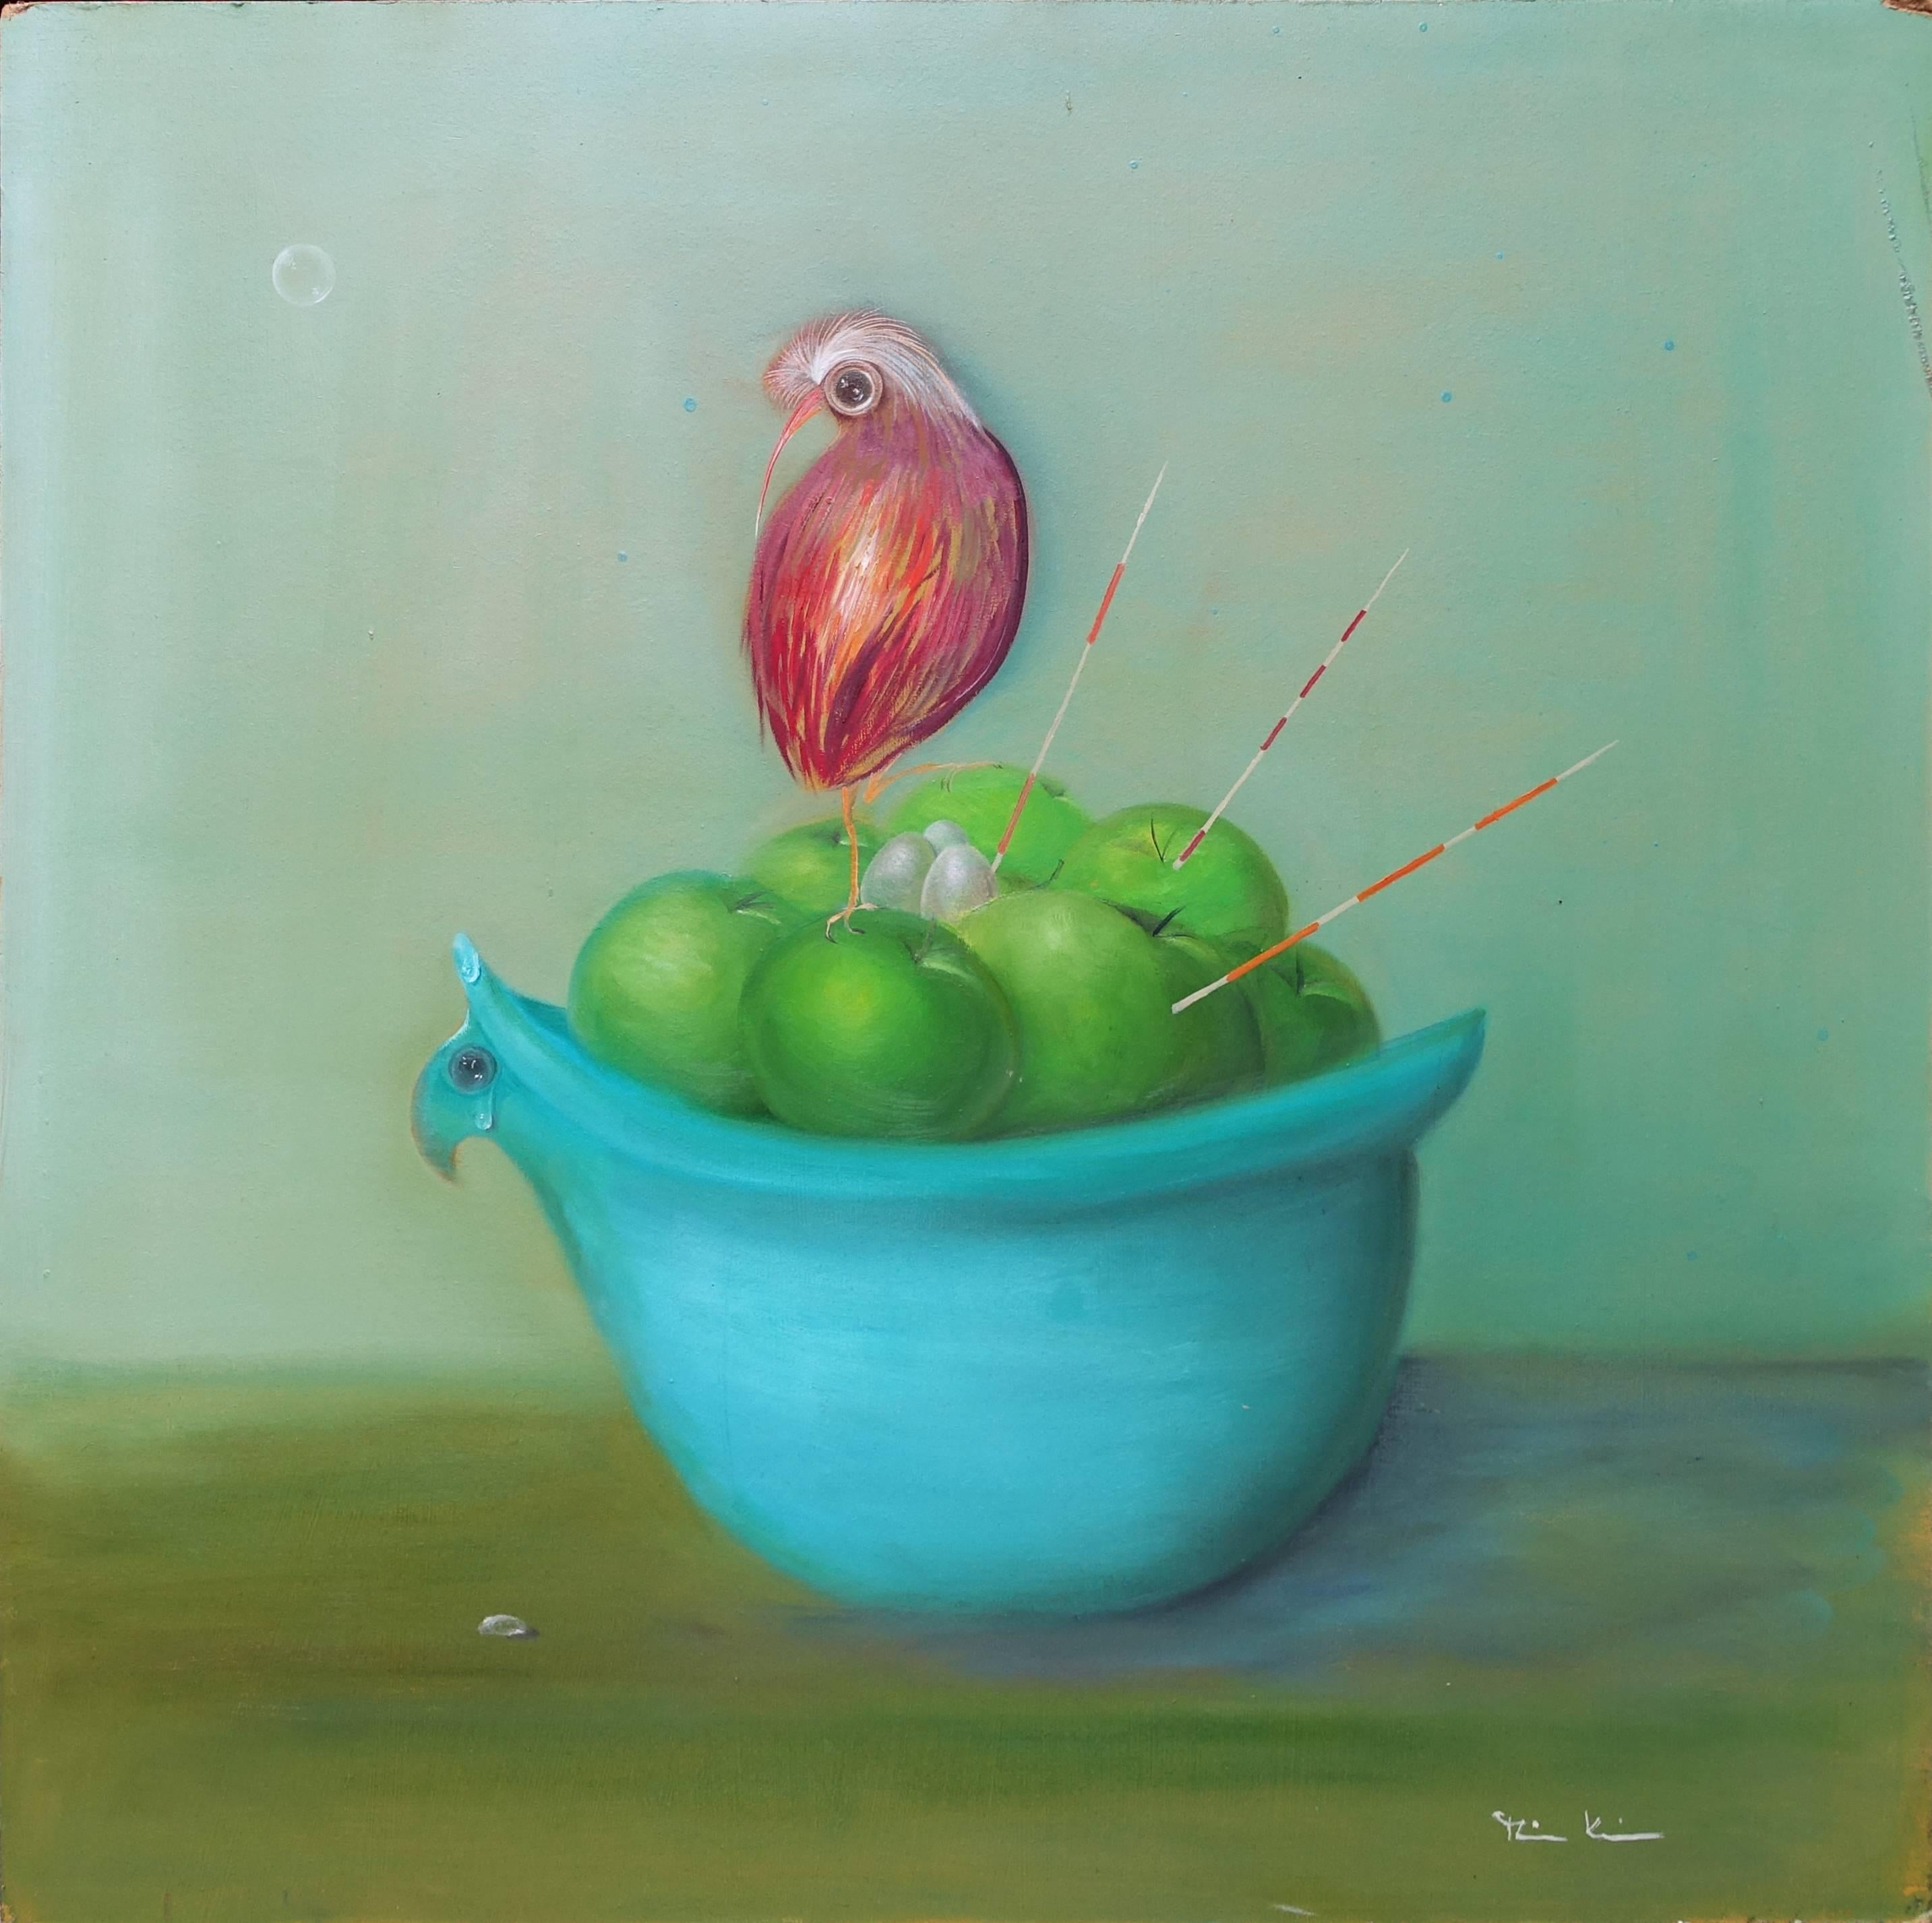 Maike Kreichgauer Figurative Painting - Apple Nest in a Turquoise Bowl